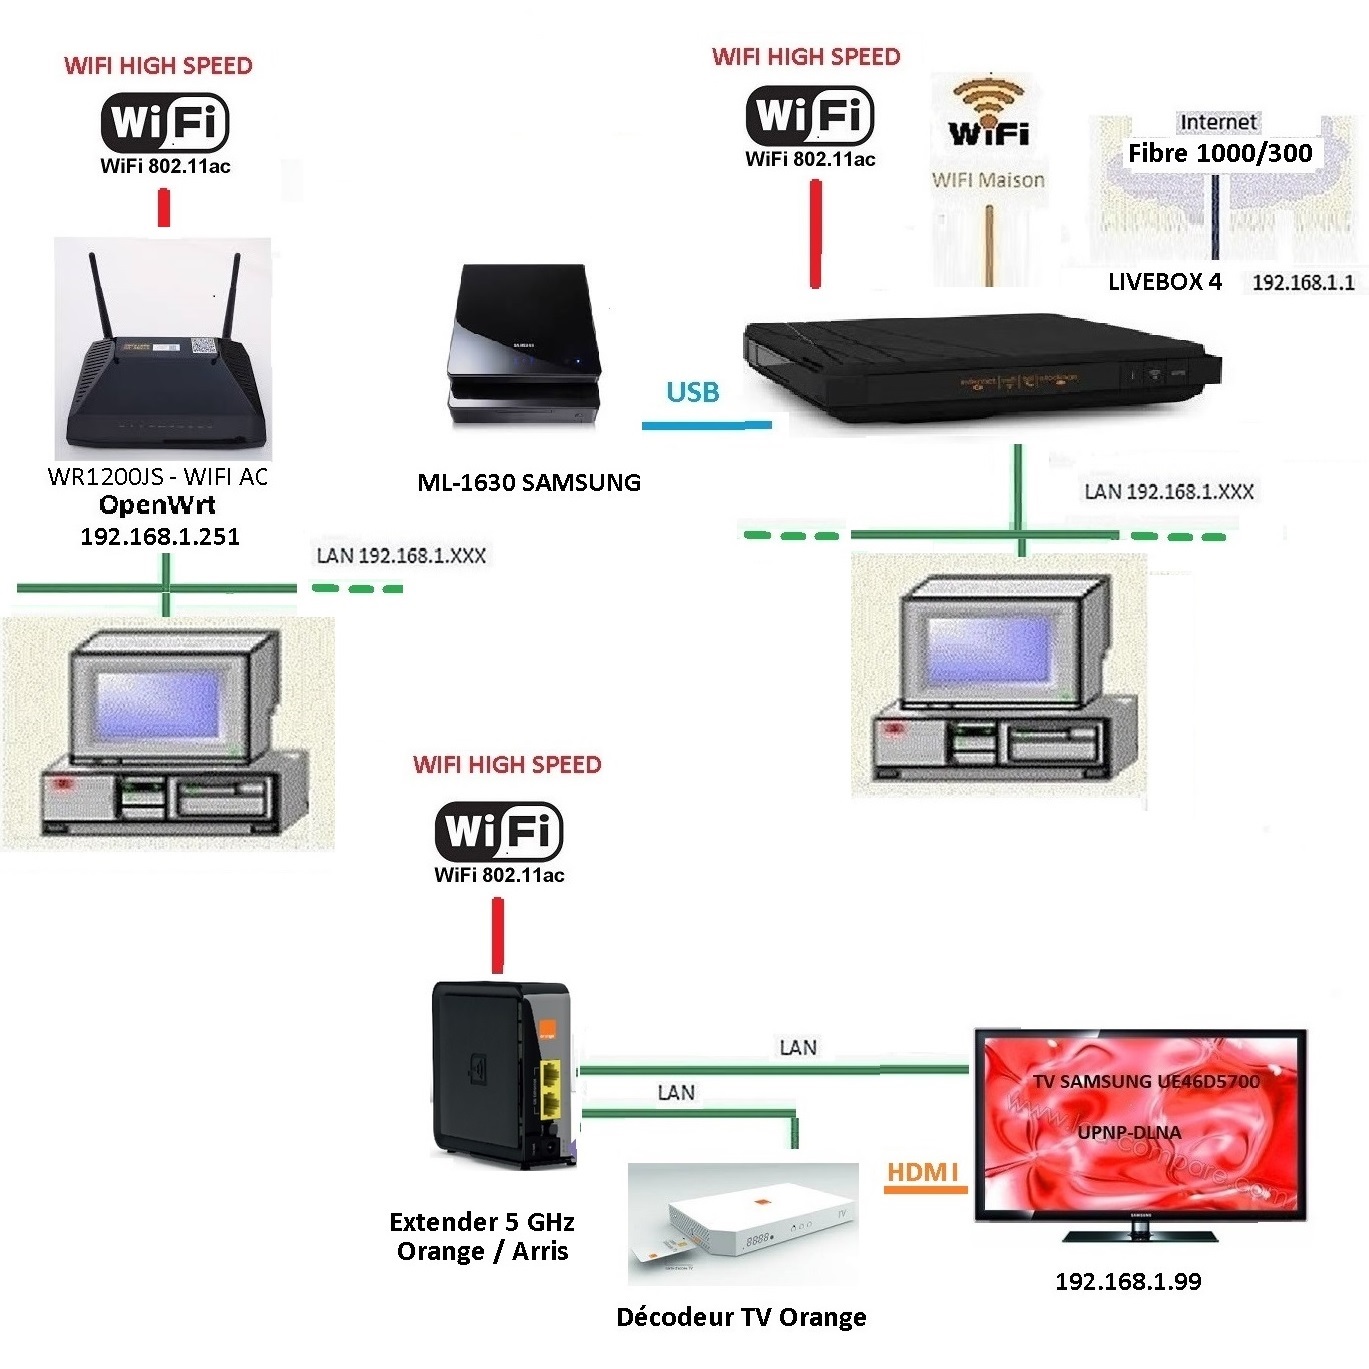 Wireless Repeater (5 GHz) on WRT1200AC - Network and Wireless Configuration 